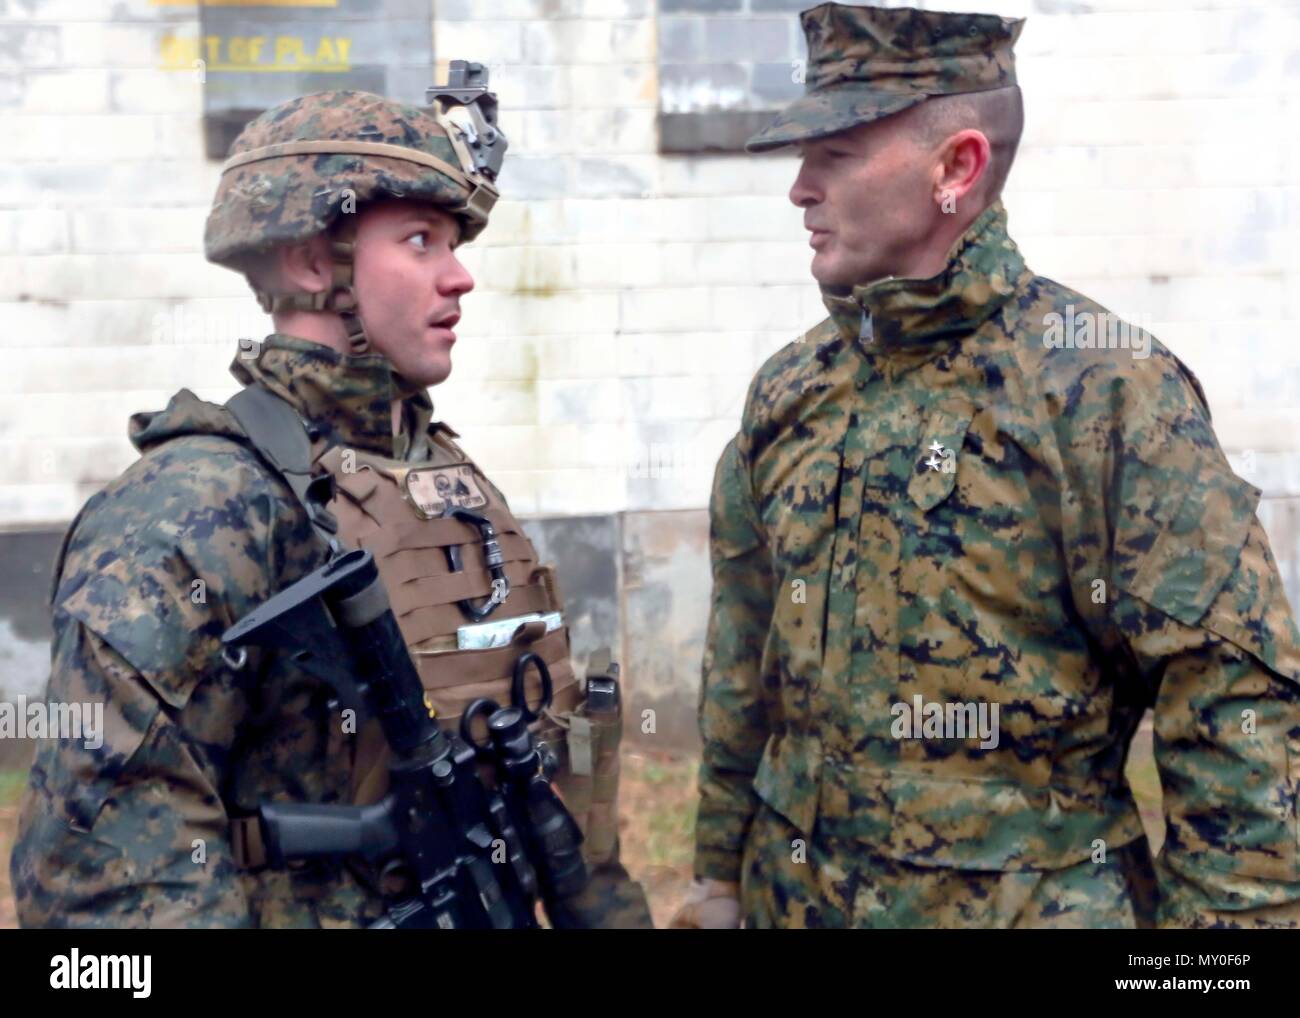 Major Gen. John K. Love congratulates Cpl. Zachary A. Warford on winning Marine of the Quarter for 2nd Marine Division during a deployment for training exercise at Fort Pickett, Va., Dec. 6, 2016. The Marines conducted a two-week DFT in preparation for their upcoming unit deployment program. Love is the Commanding General for 2nd Marine Division and Warford is a team leader with Lima Company, 3rd Battalion, 8th Marine Regiment. (U.S. Marine Corps photo by Sgt. Clemente C. Garcia) Stock Photo